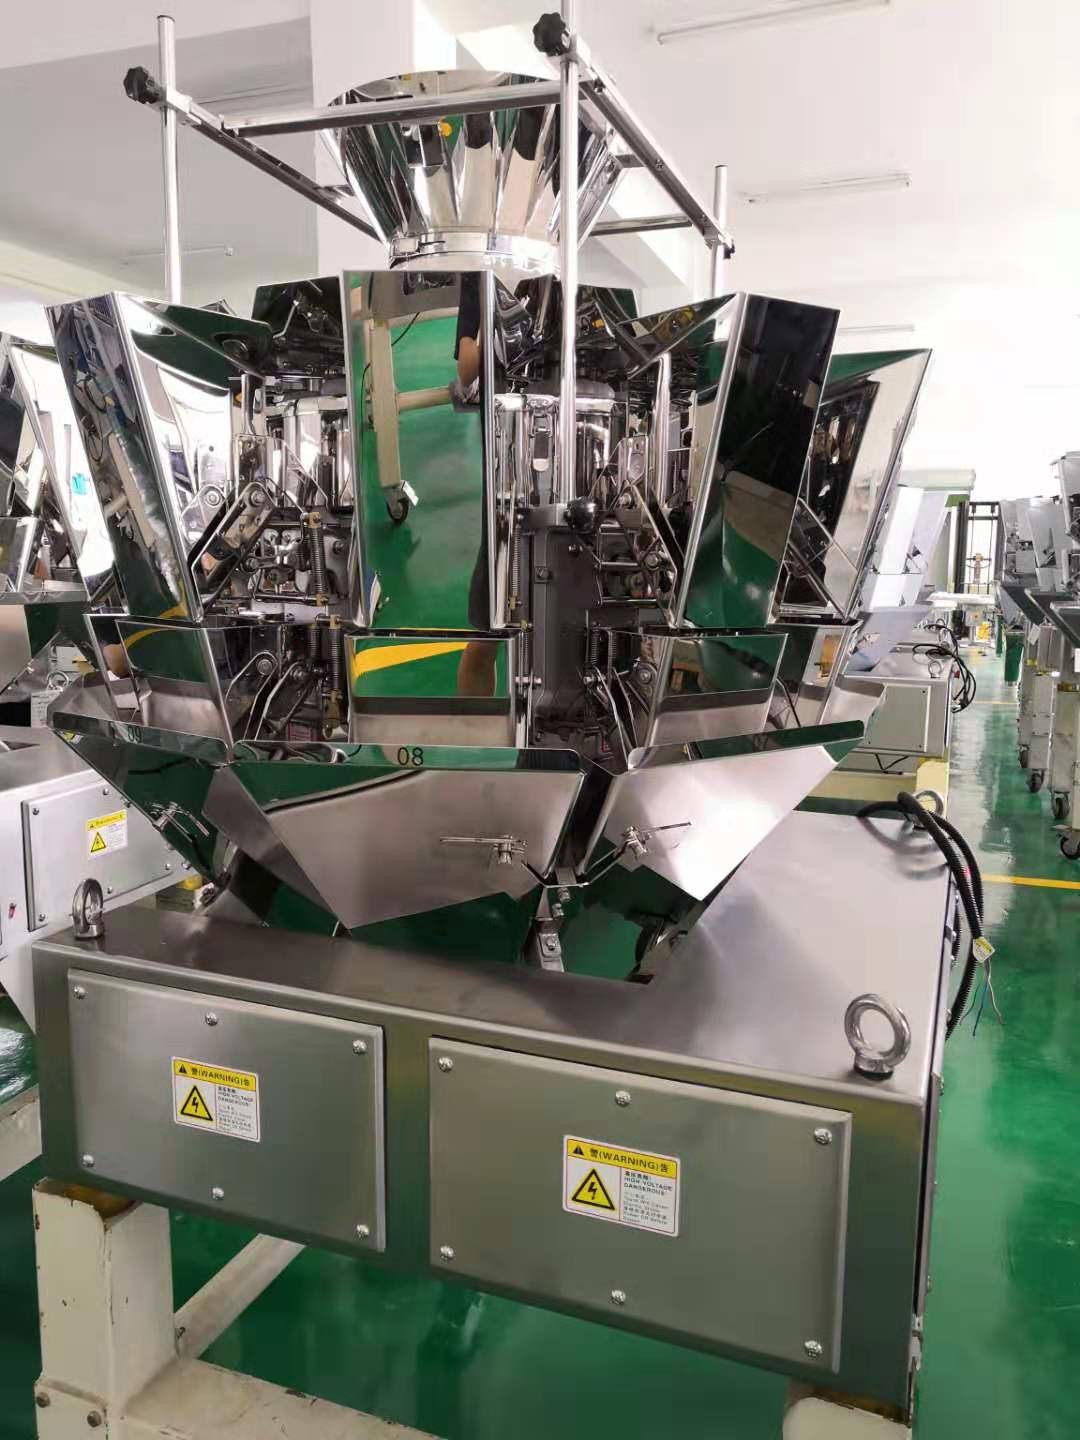 OEM 2kg Automatic Food Packing Machine With Date Printing